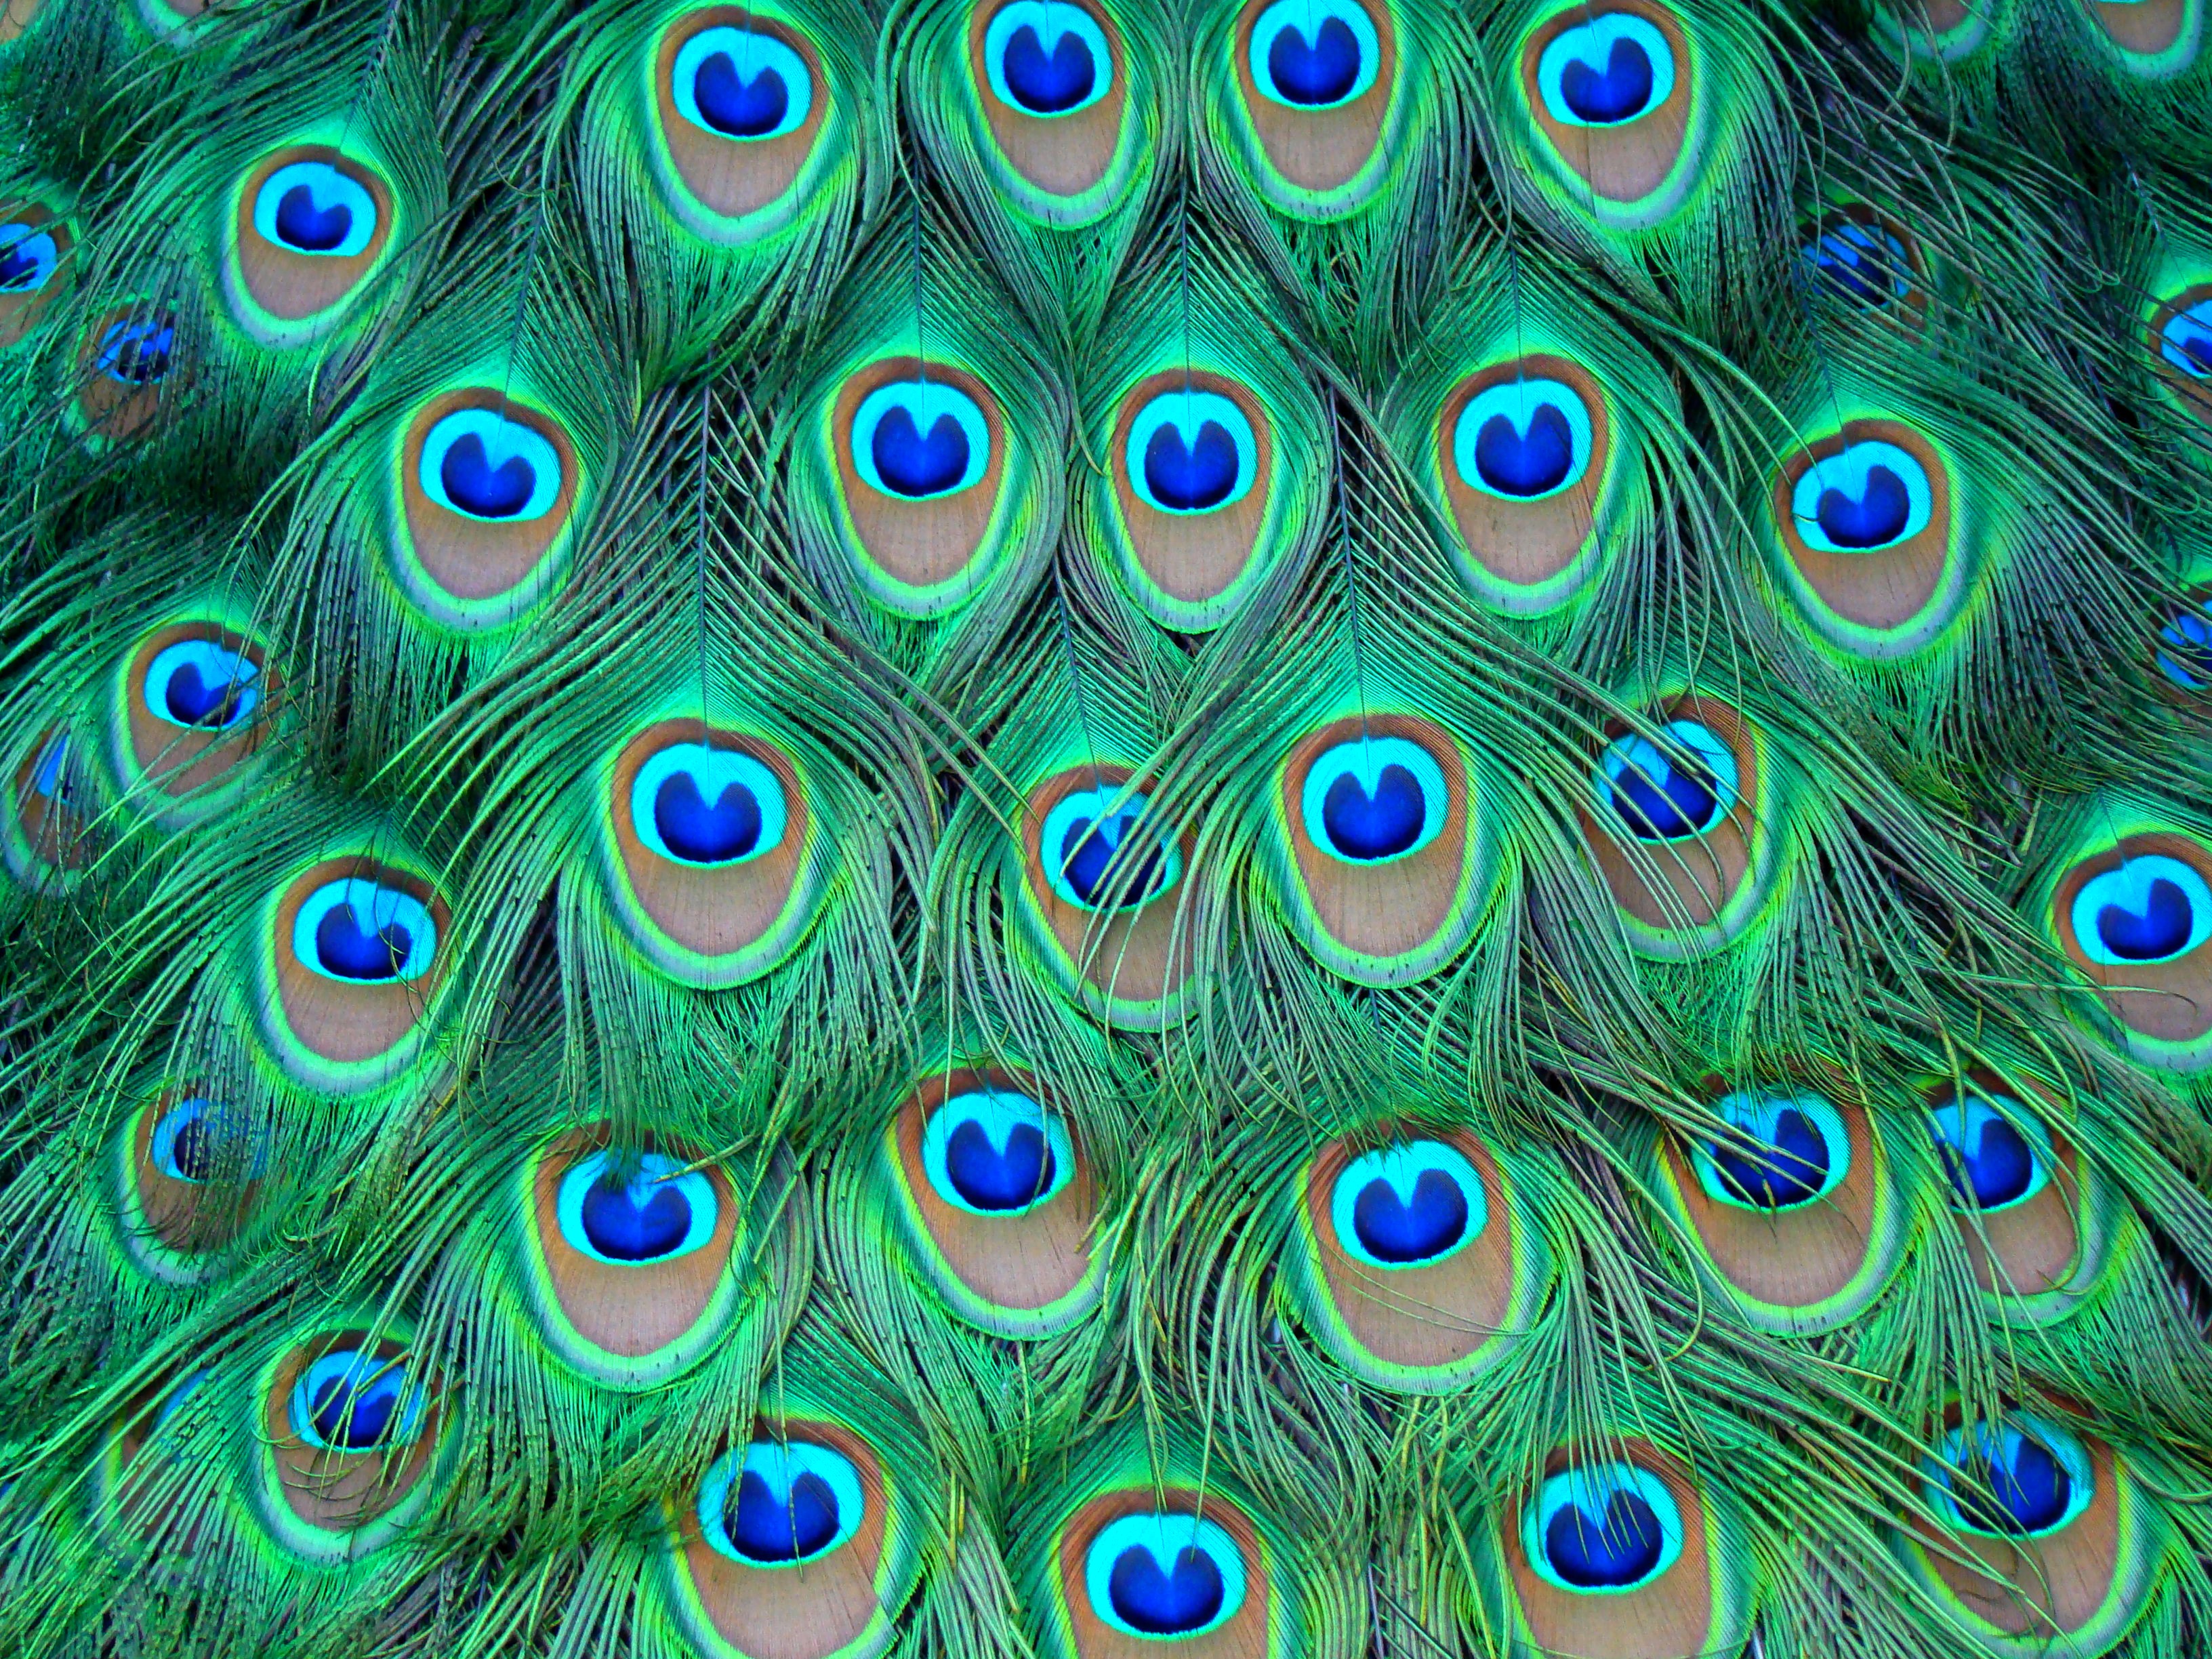 Peacock Feathers Wallpaper